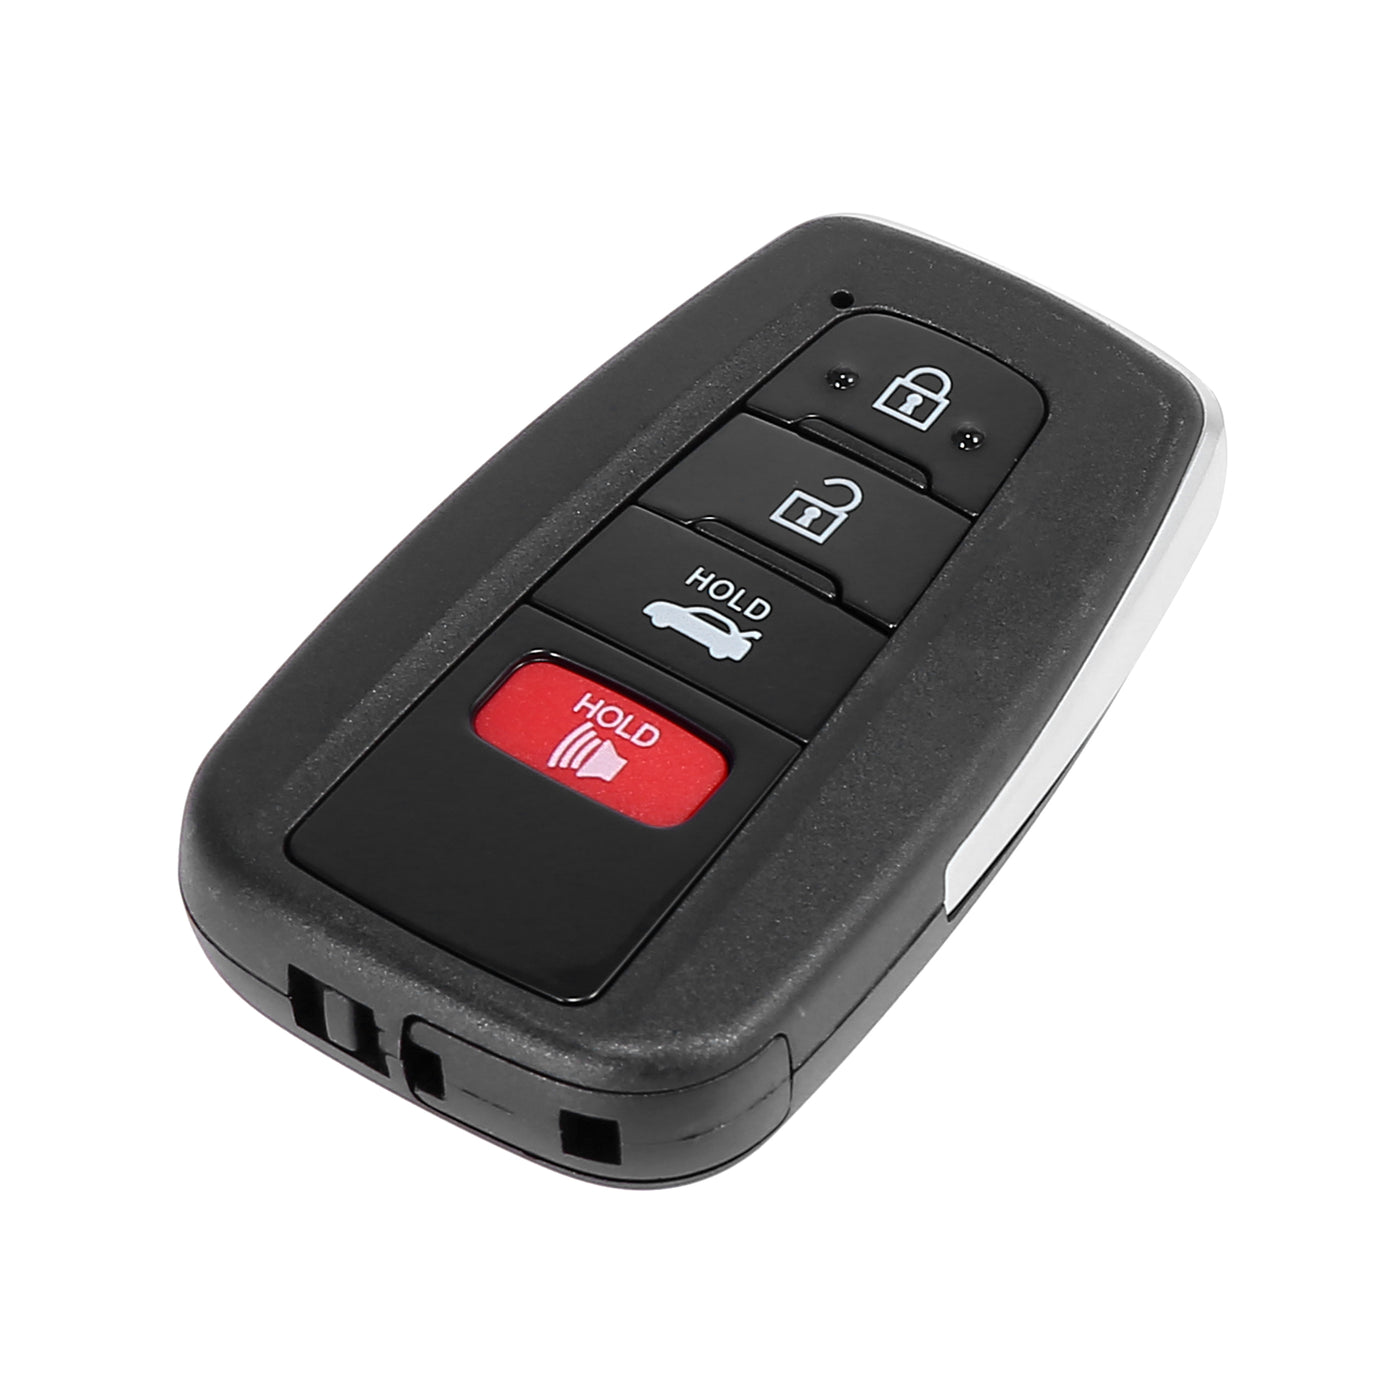 X AUTOHAUX 314.3MHz HYQ14FBC-0351 Replacement Keyless Entry Remote Car Key Fob for Toyota Camry 2018 2019 2020 2021 1551A-14FBC